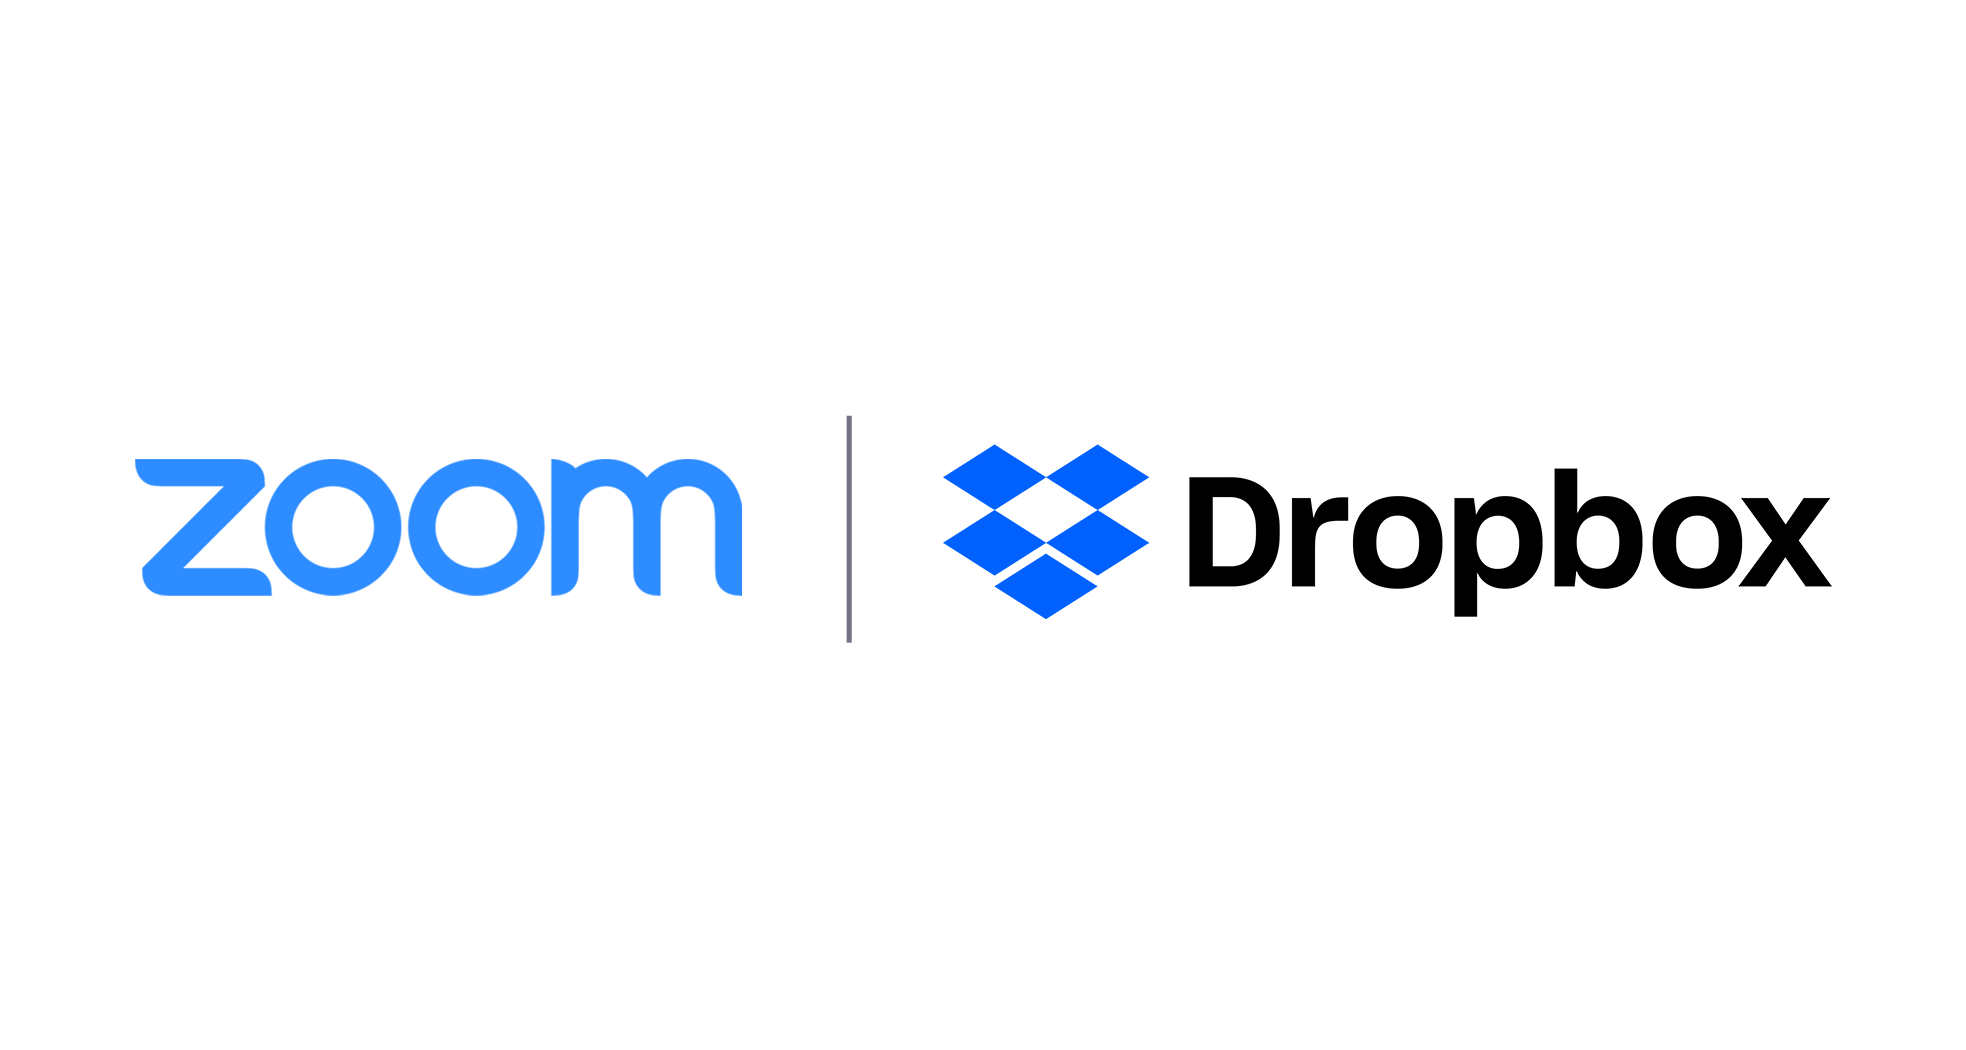 Zoom and Dropbox